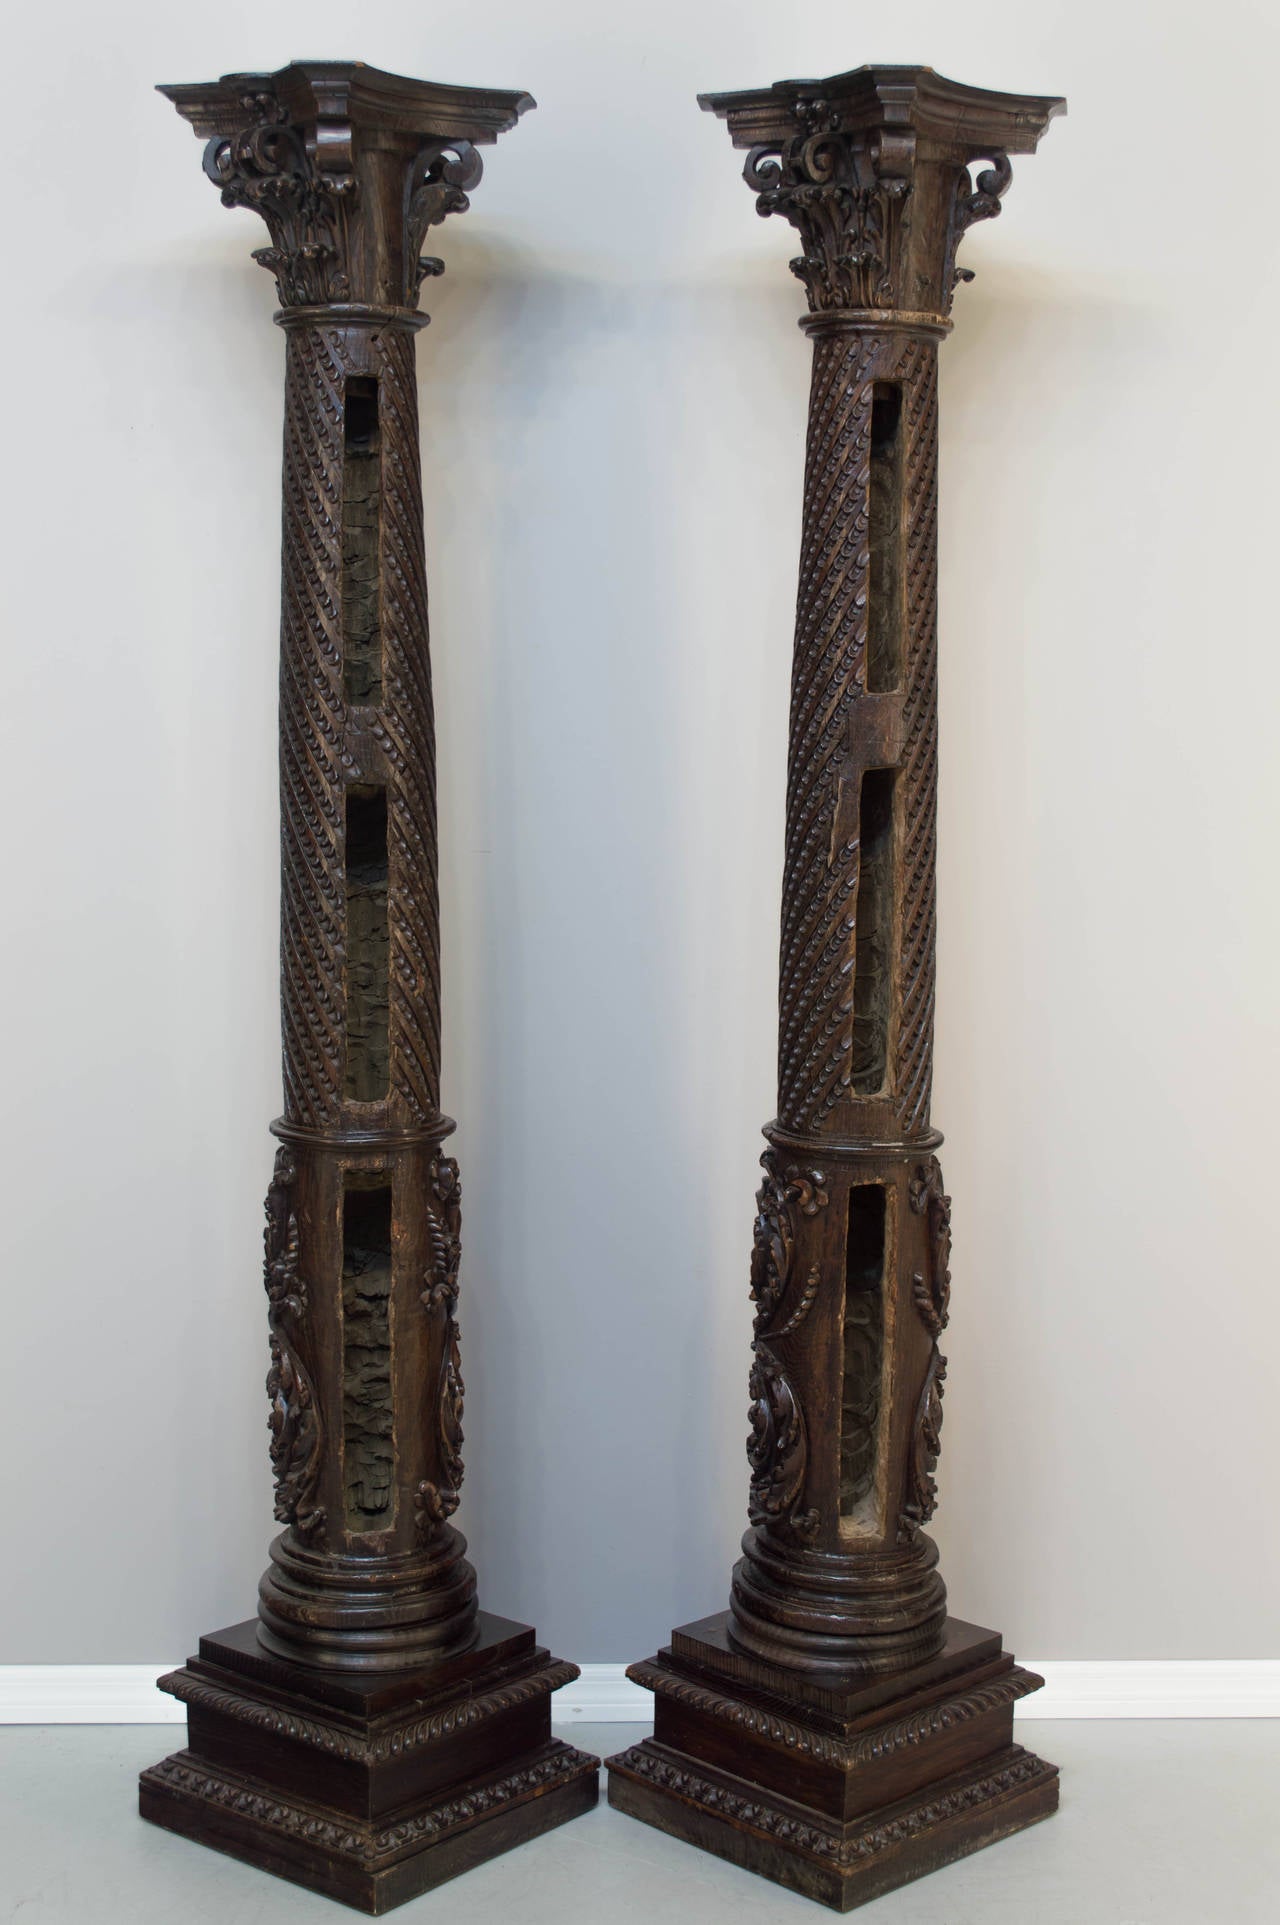 A rare pair of early 18th Century French neoclassical columns, made of chestnut and intricately carved by hand with elaborate detail.
More photos available upon request. We have a large selection of French antiques. Please visit our showroom in